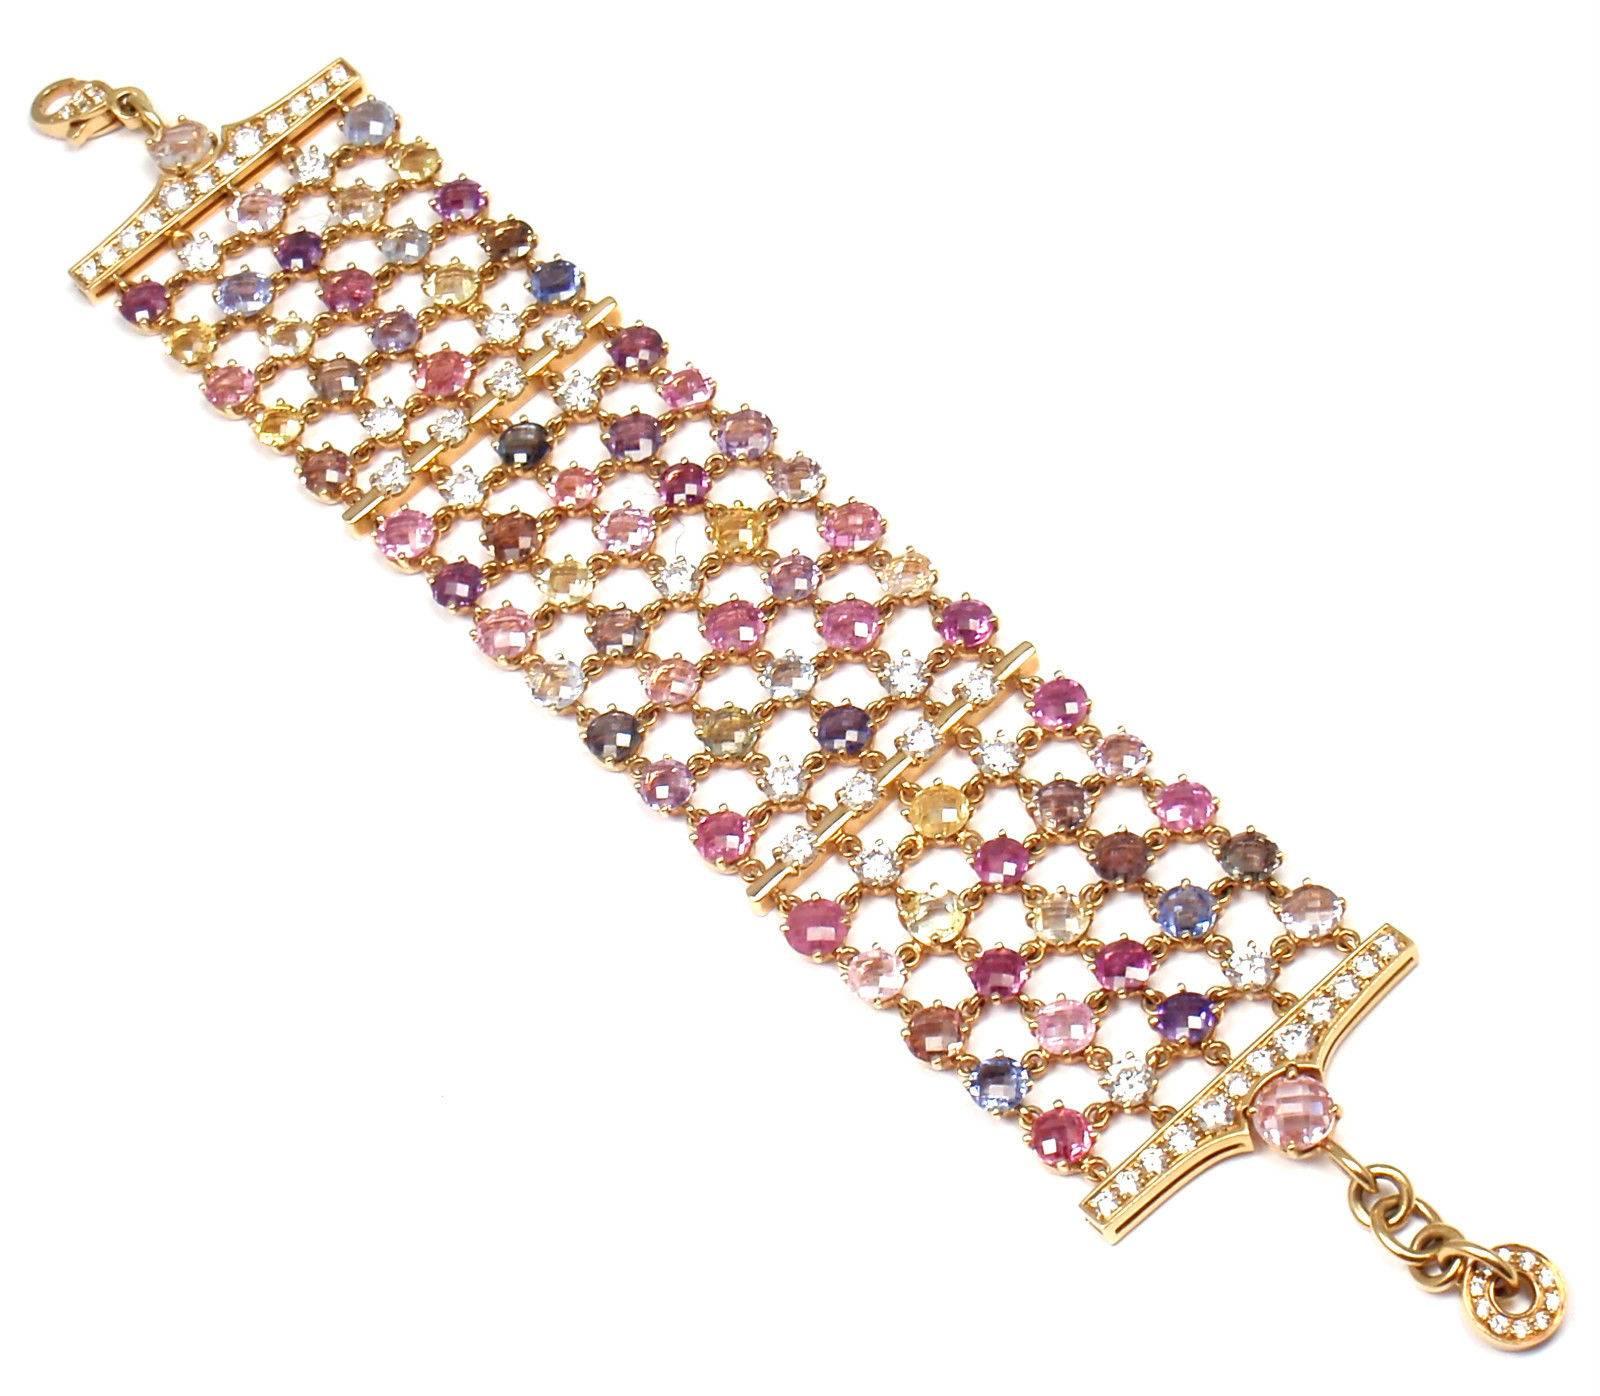 18k Yellow Gold Diamond And Fancy Color Sapphires Link Bracelet by Bulgari.  
With 74 Fancy Color Sapphires total weight approx. 36.65ct
13 round brilliant cut diamonds color F-G clarity VS1 total weight approx. 3.30ct
8 round brilliant cut diamonds